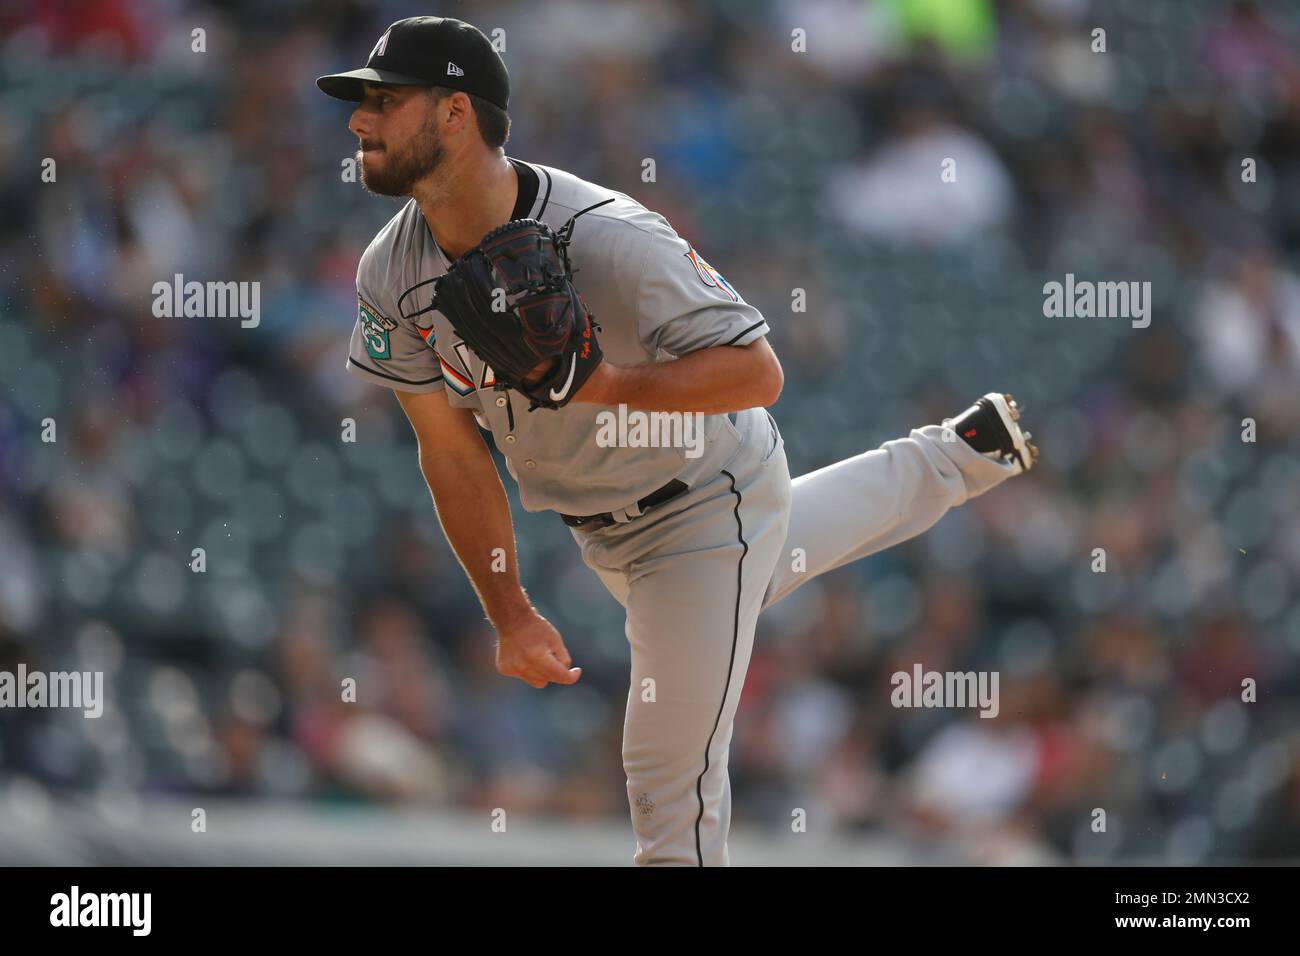 Miami Marlins relief pitcher Kyle Barraclough delivers during the ninth  inning of a baseball game against the New York Mets, Saturday, June 30,  2018, in Miami. The Marlins won 5-2. (AP Photo/Lynne